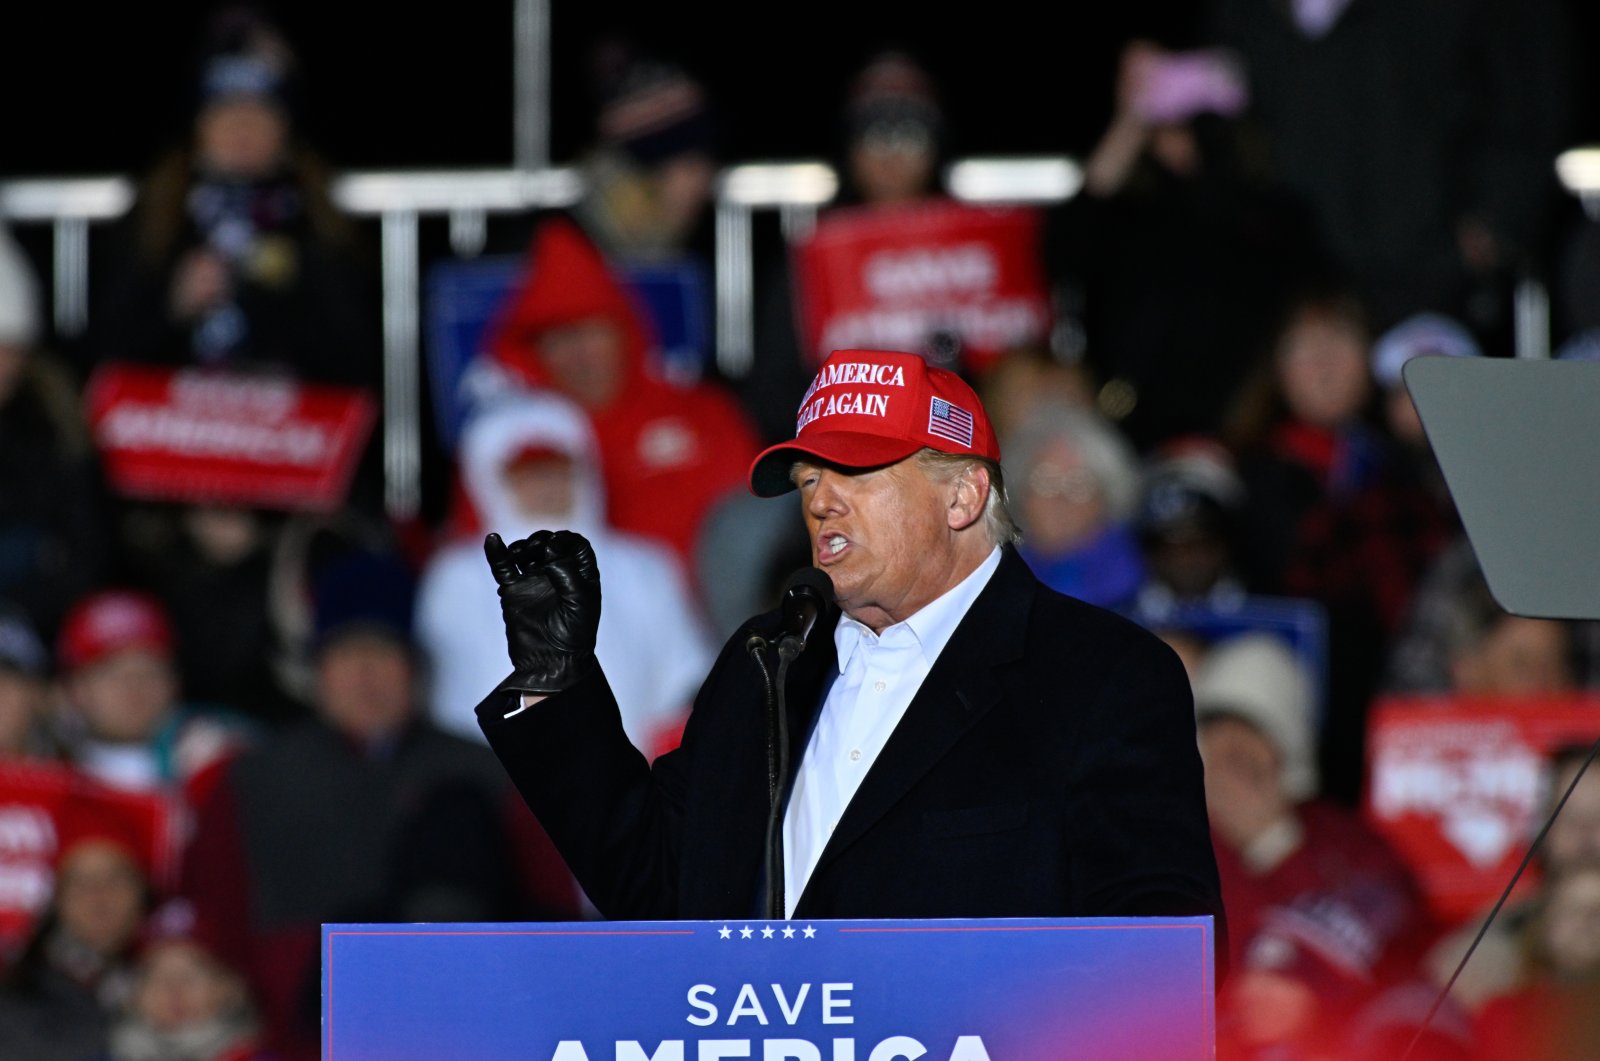 Former U.S. President Donald Trump speaks during a rally in the state of South Carolina on Mar. 12, 2022 (AA Photo)